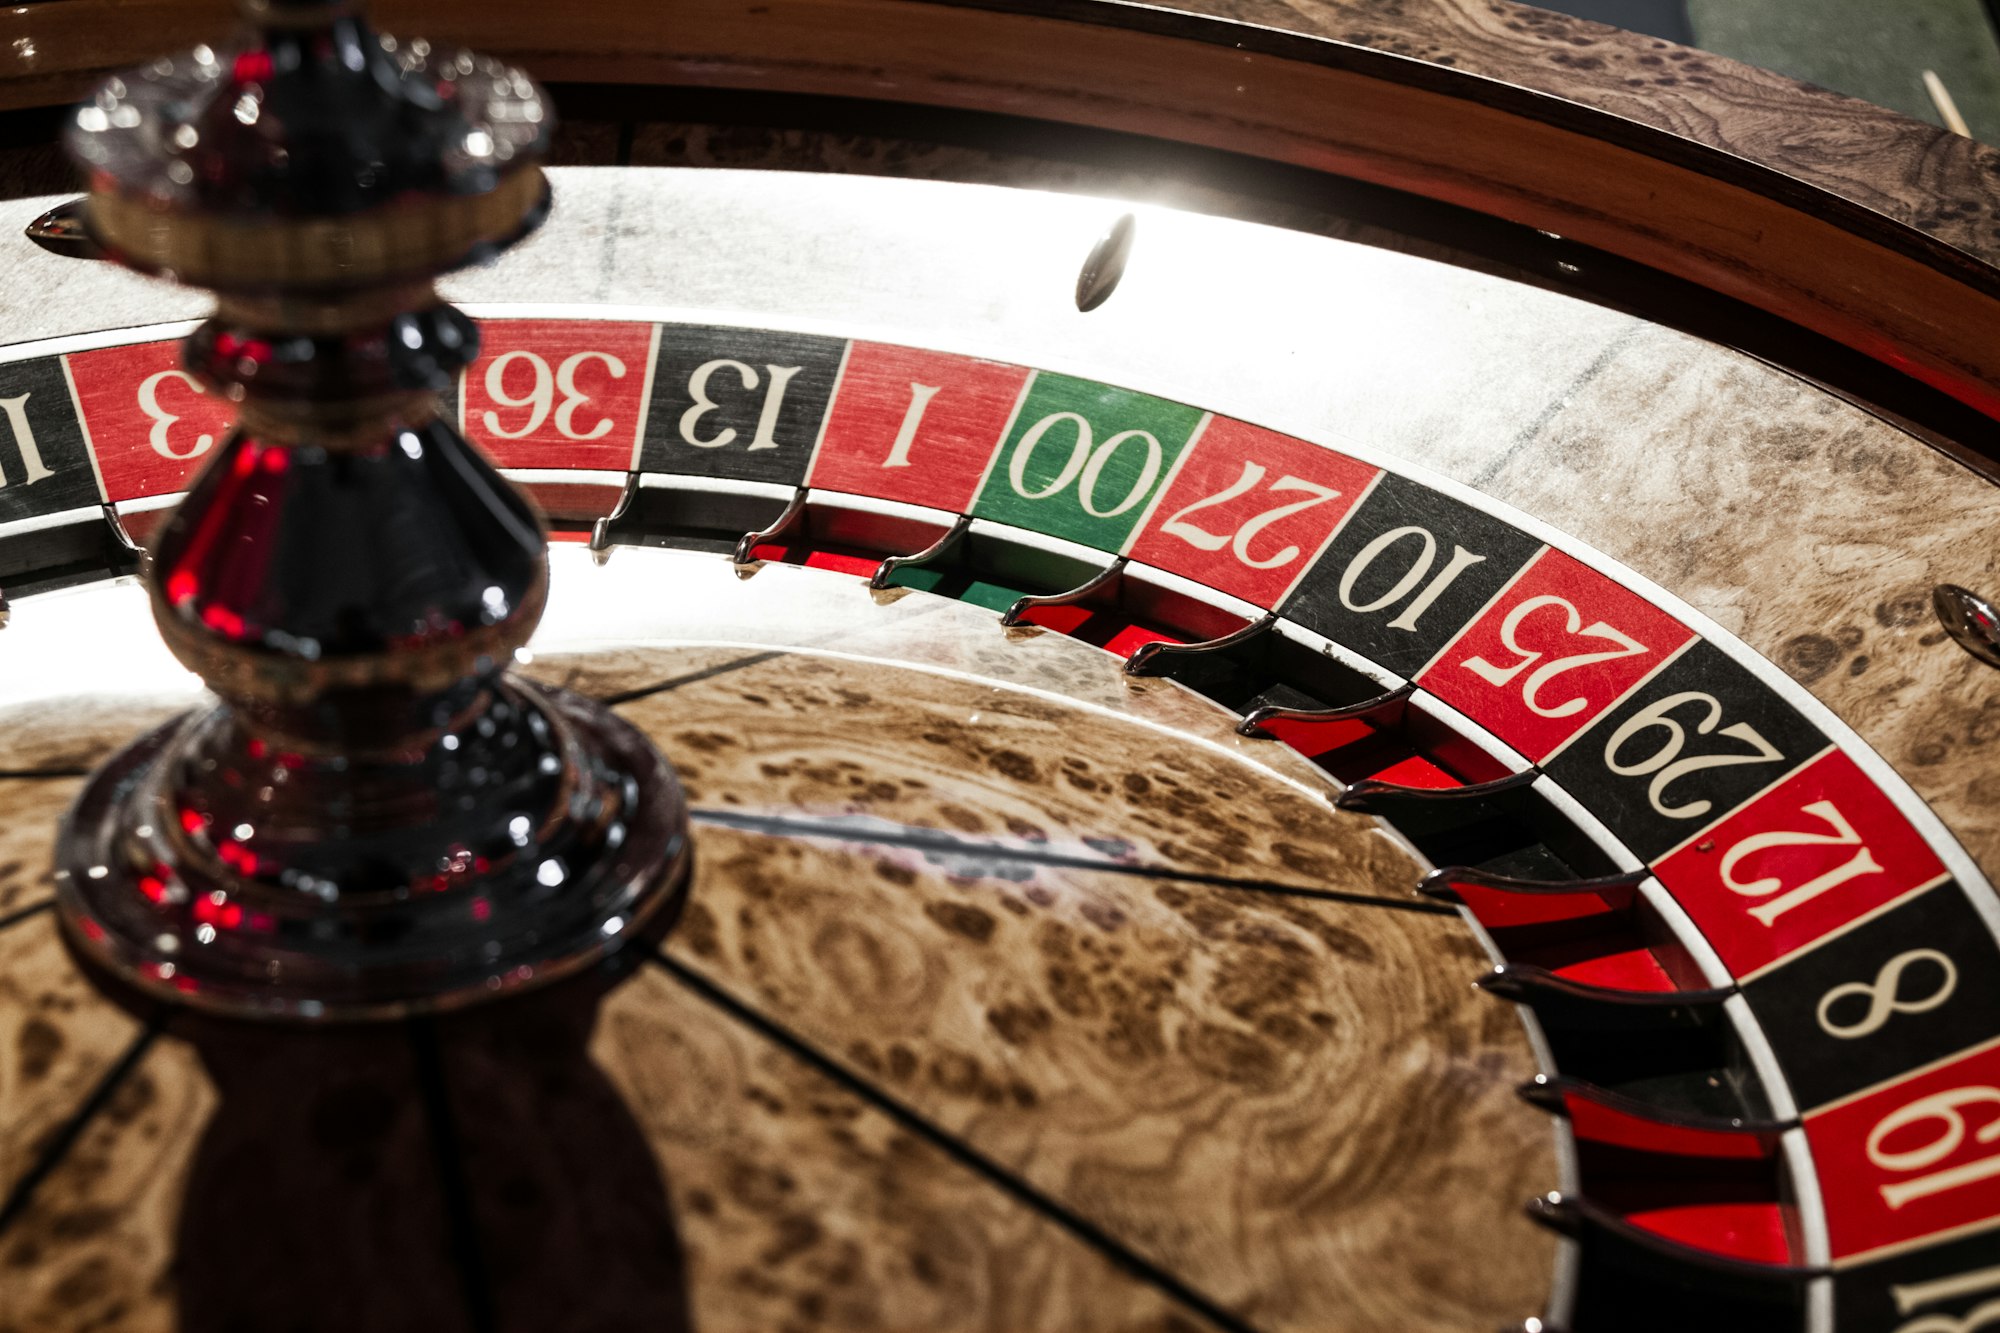 Wooden Shiny Roulette Details in a Casino